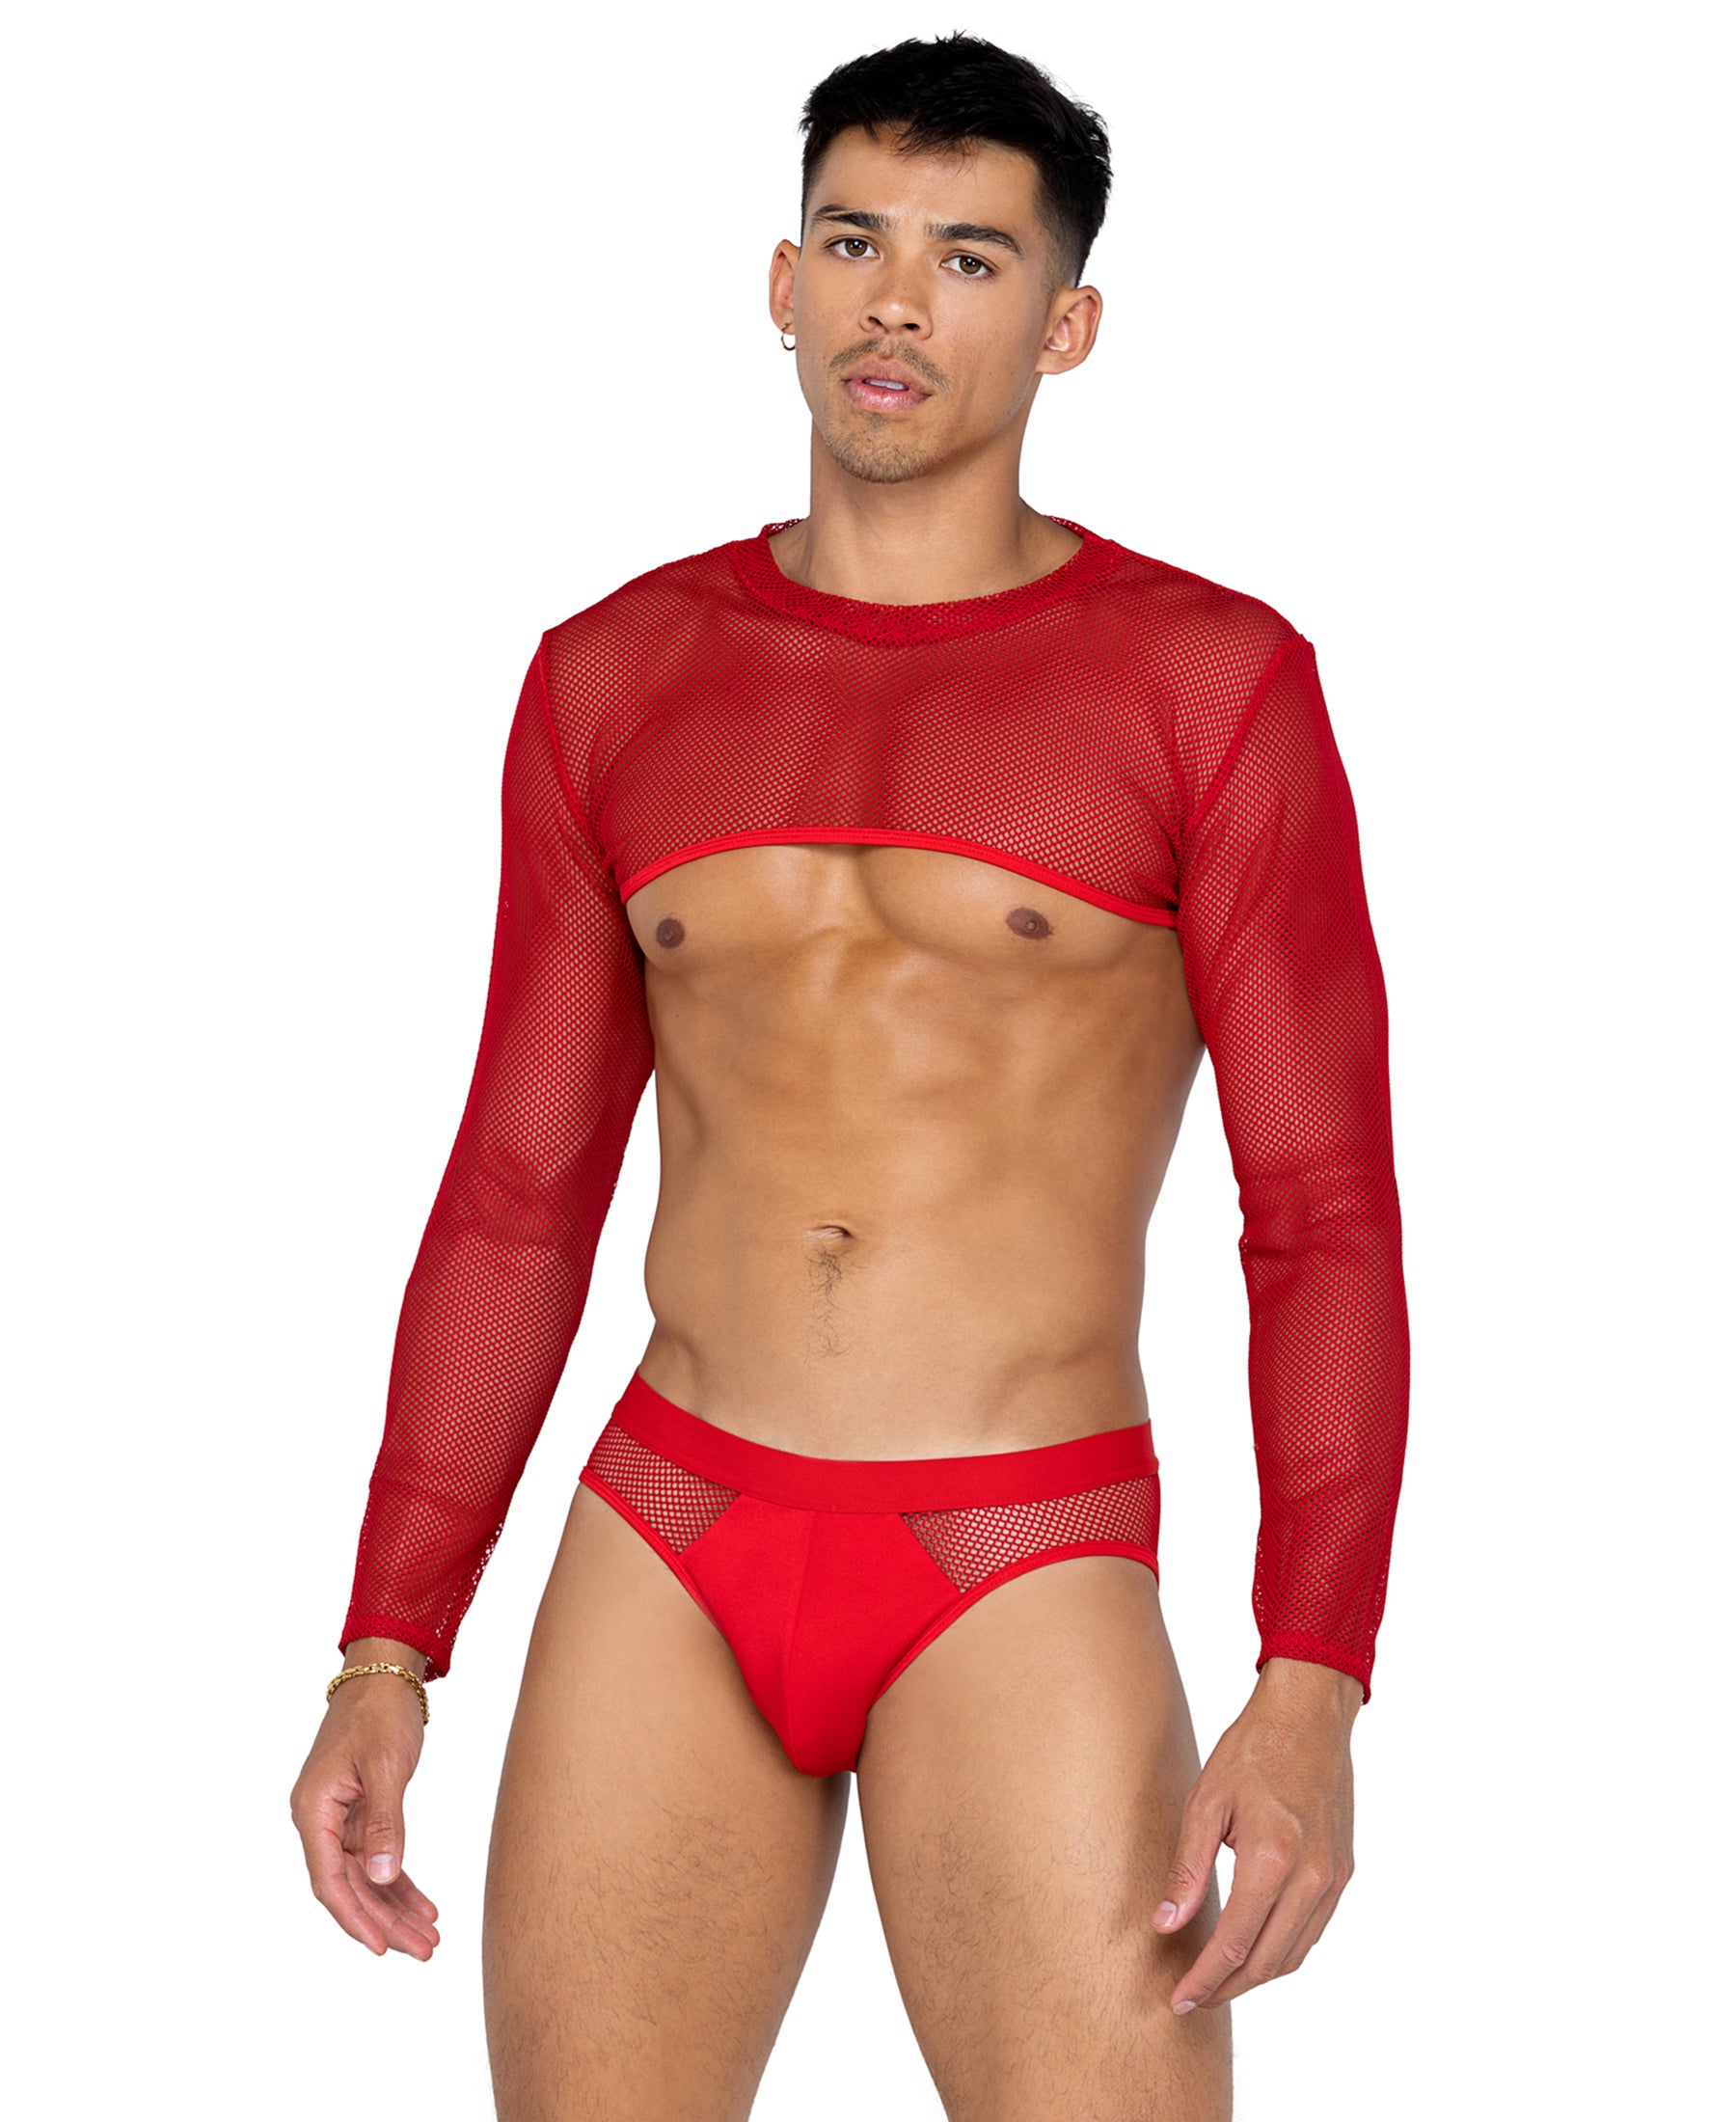 LI590 X-Posed Brief Red front view